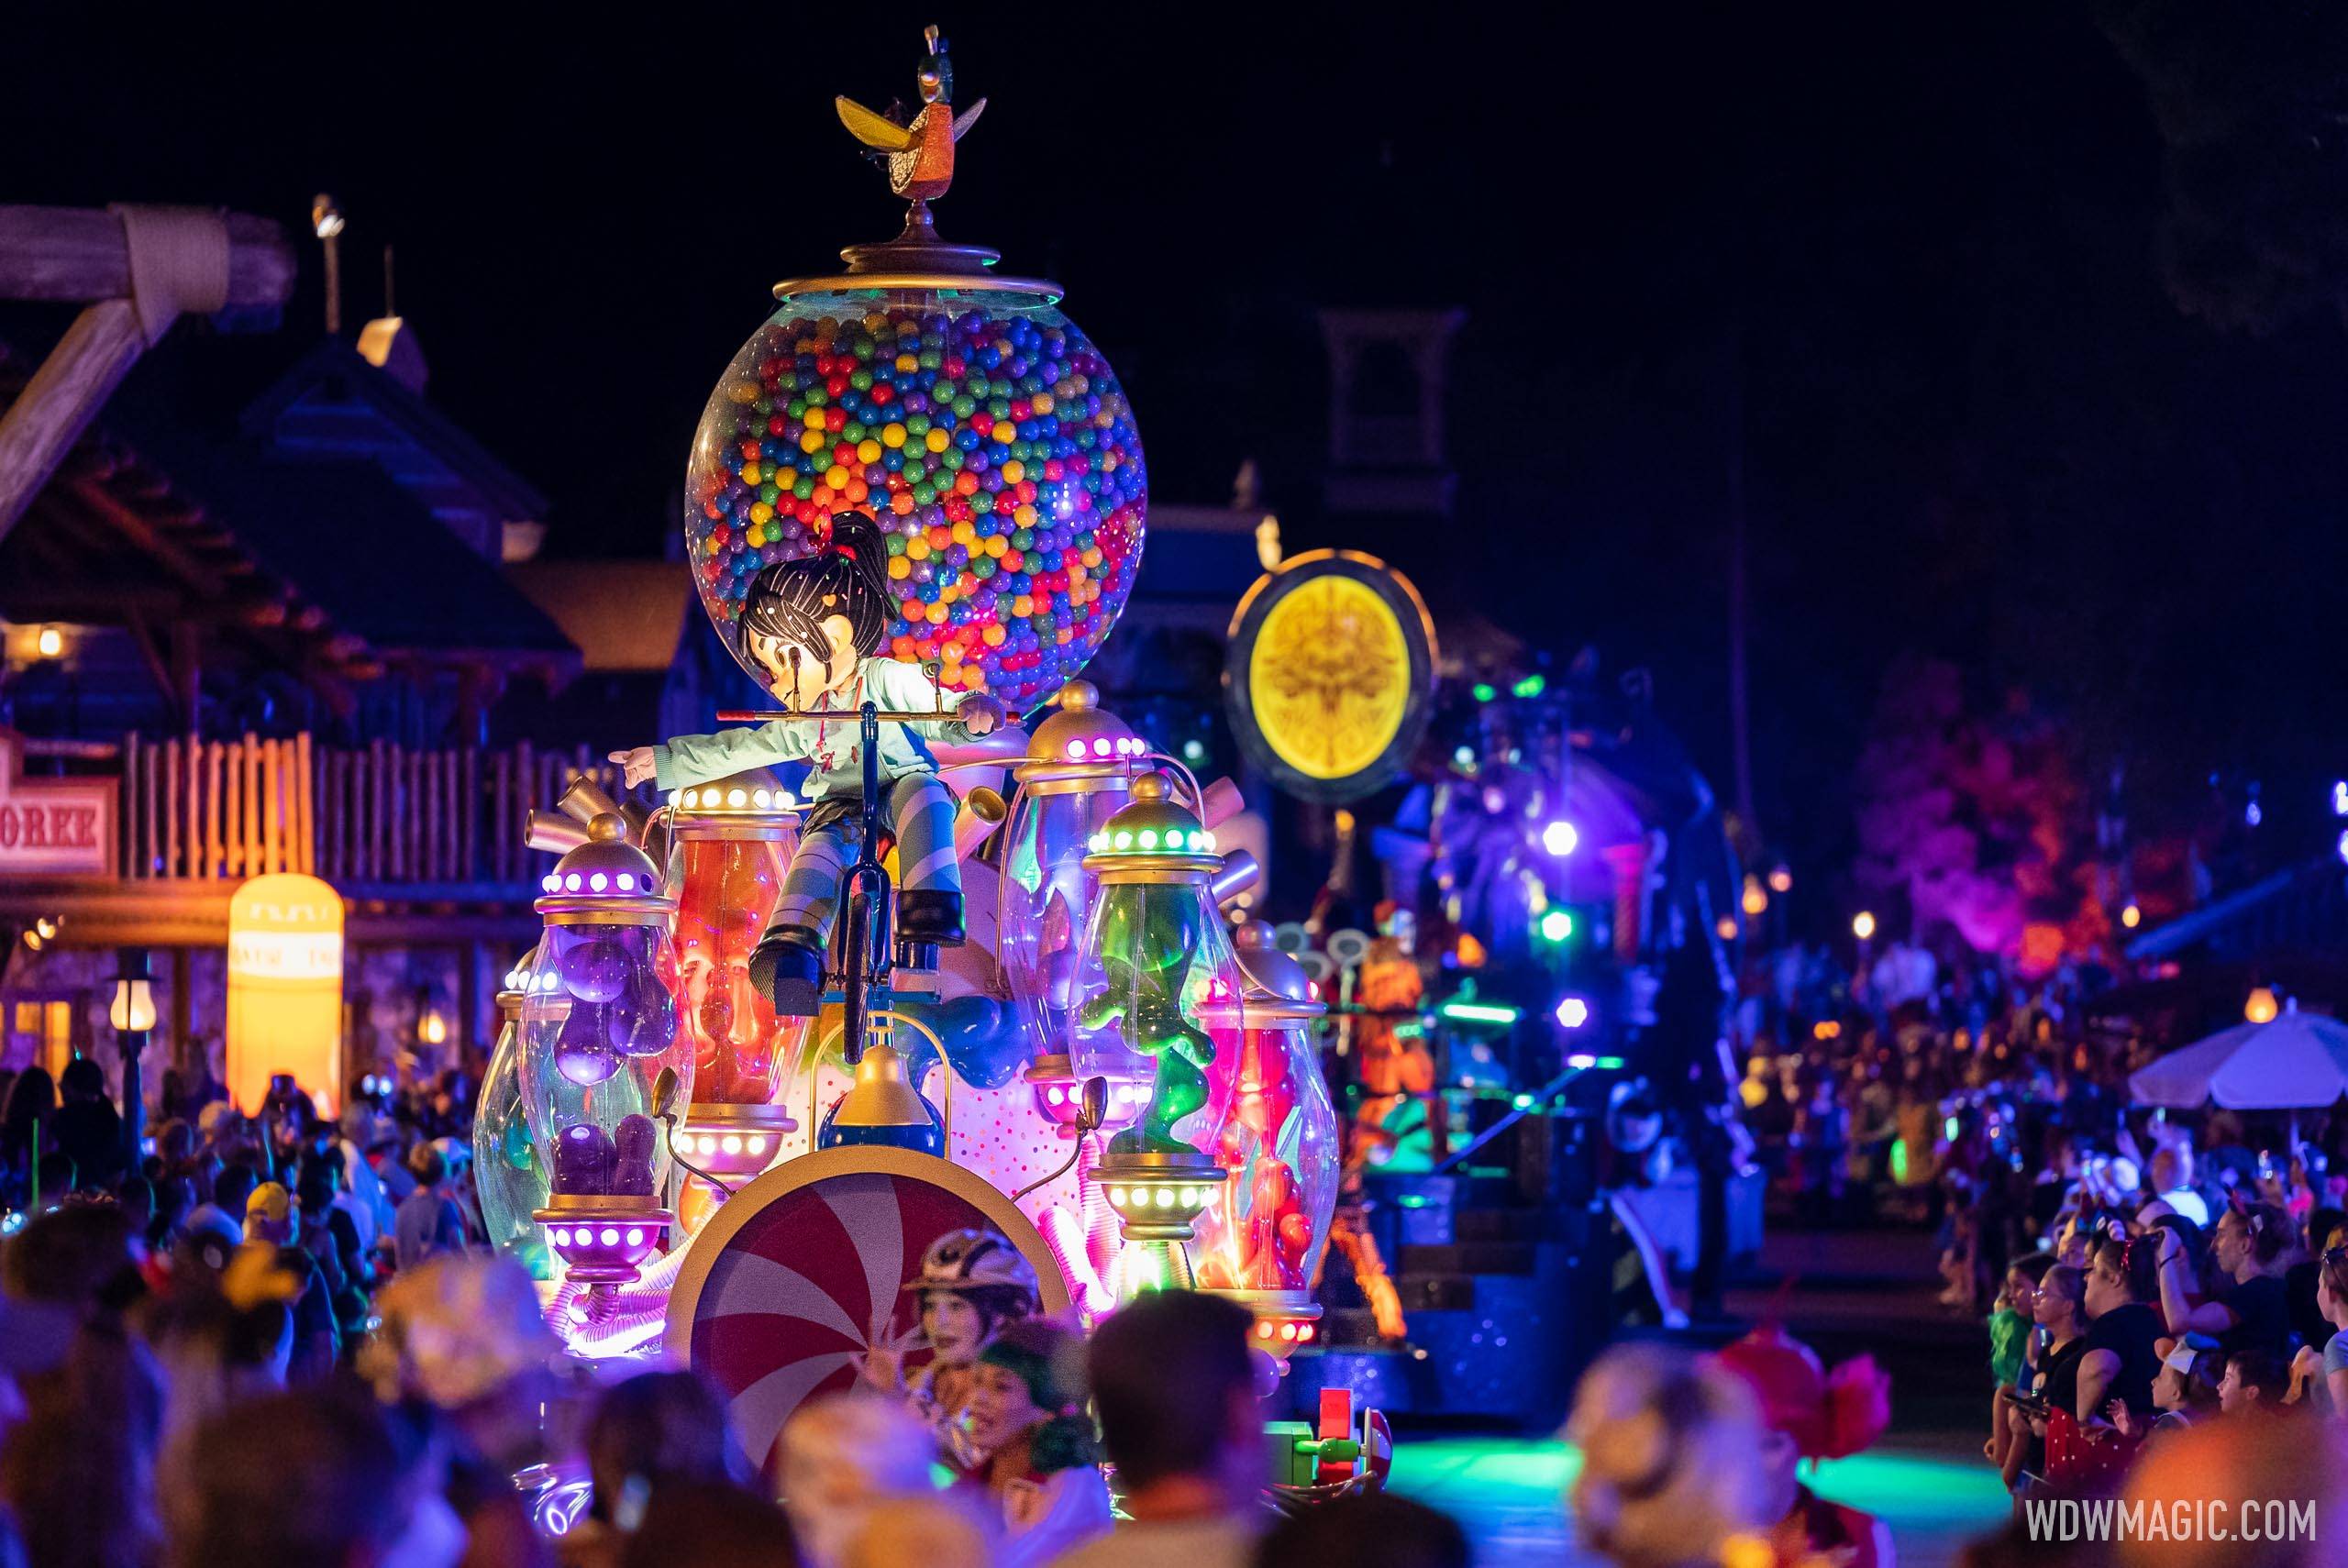 Mickey's Boo-to-You Halloween Parade 2022 - Frontierland